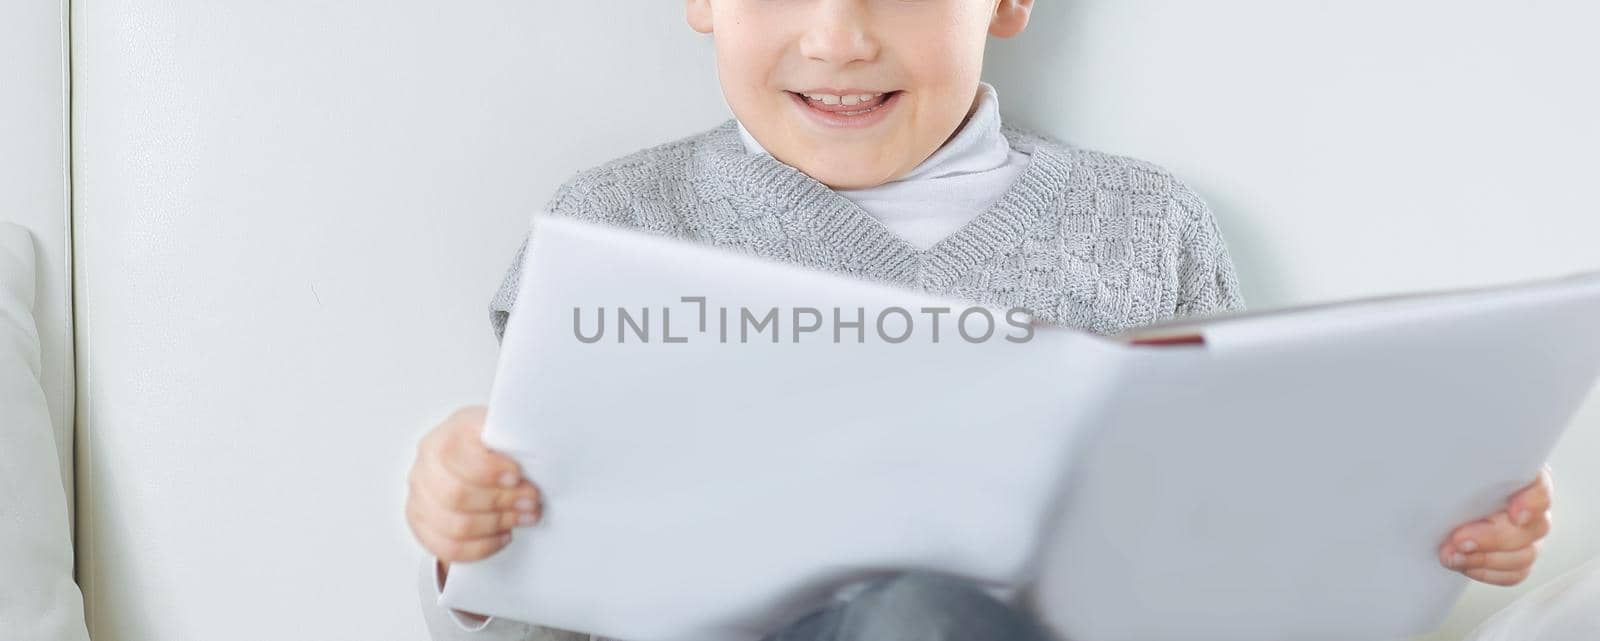 boy reads a book on the couch in the nursery.photo with copy space.